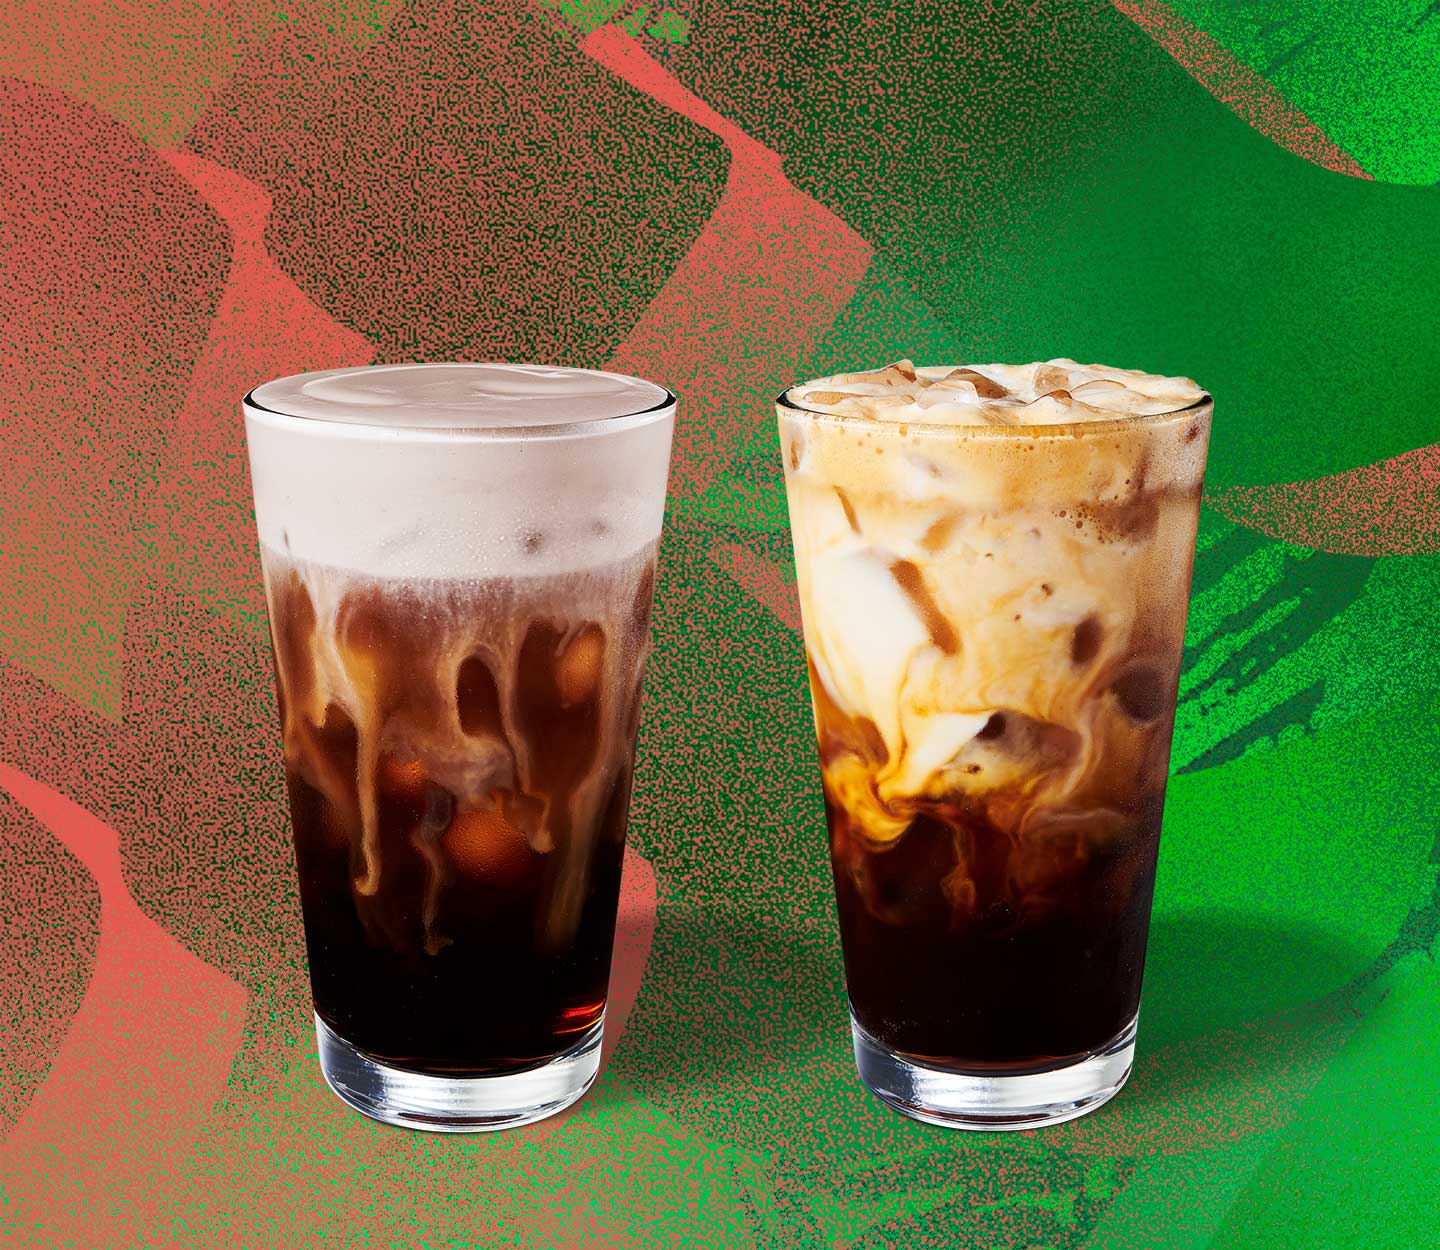 Iced coffee drink topped with foam and marbled iced coffee drink in tall glasses.